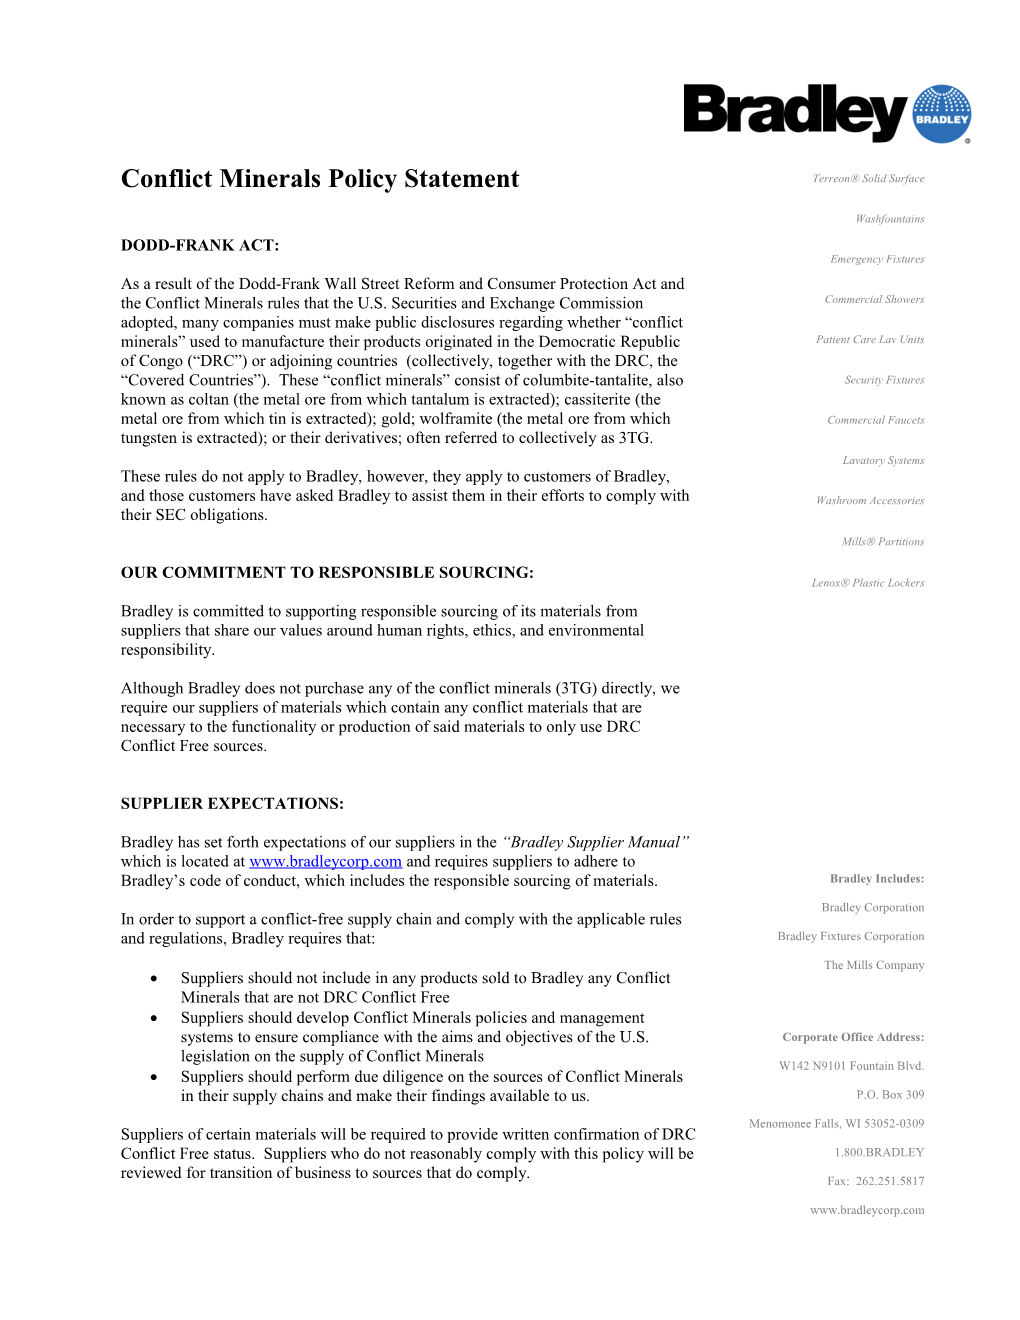 Conflict Minerals Policy Statement